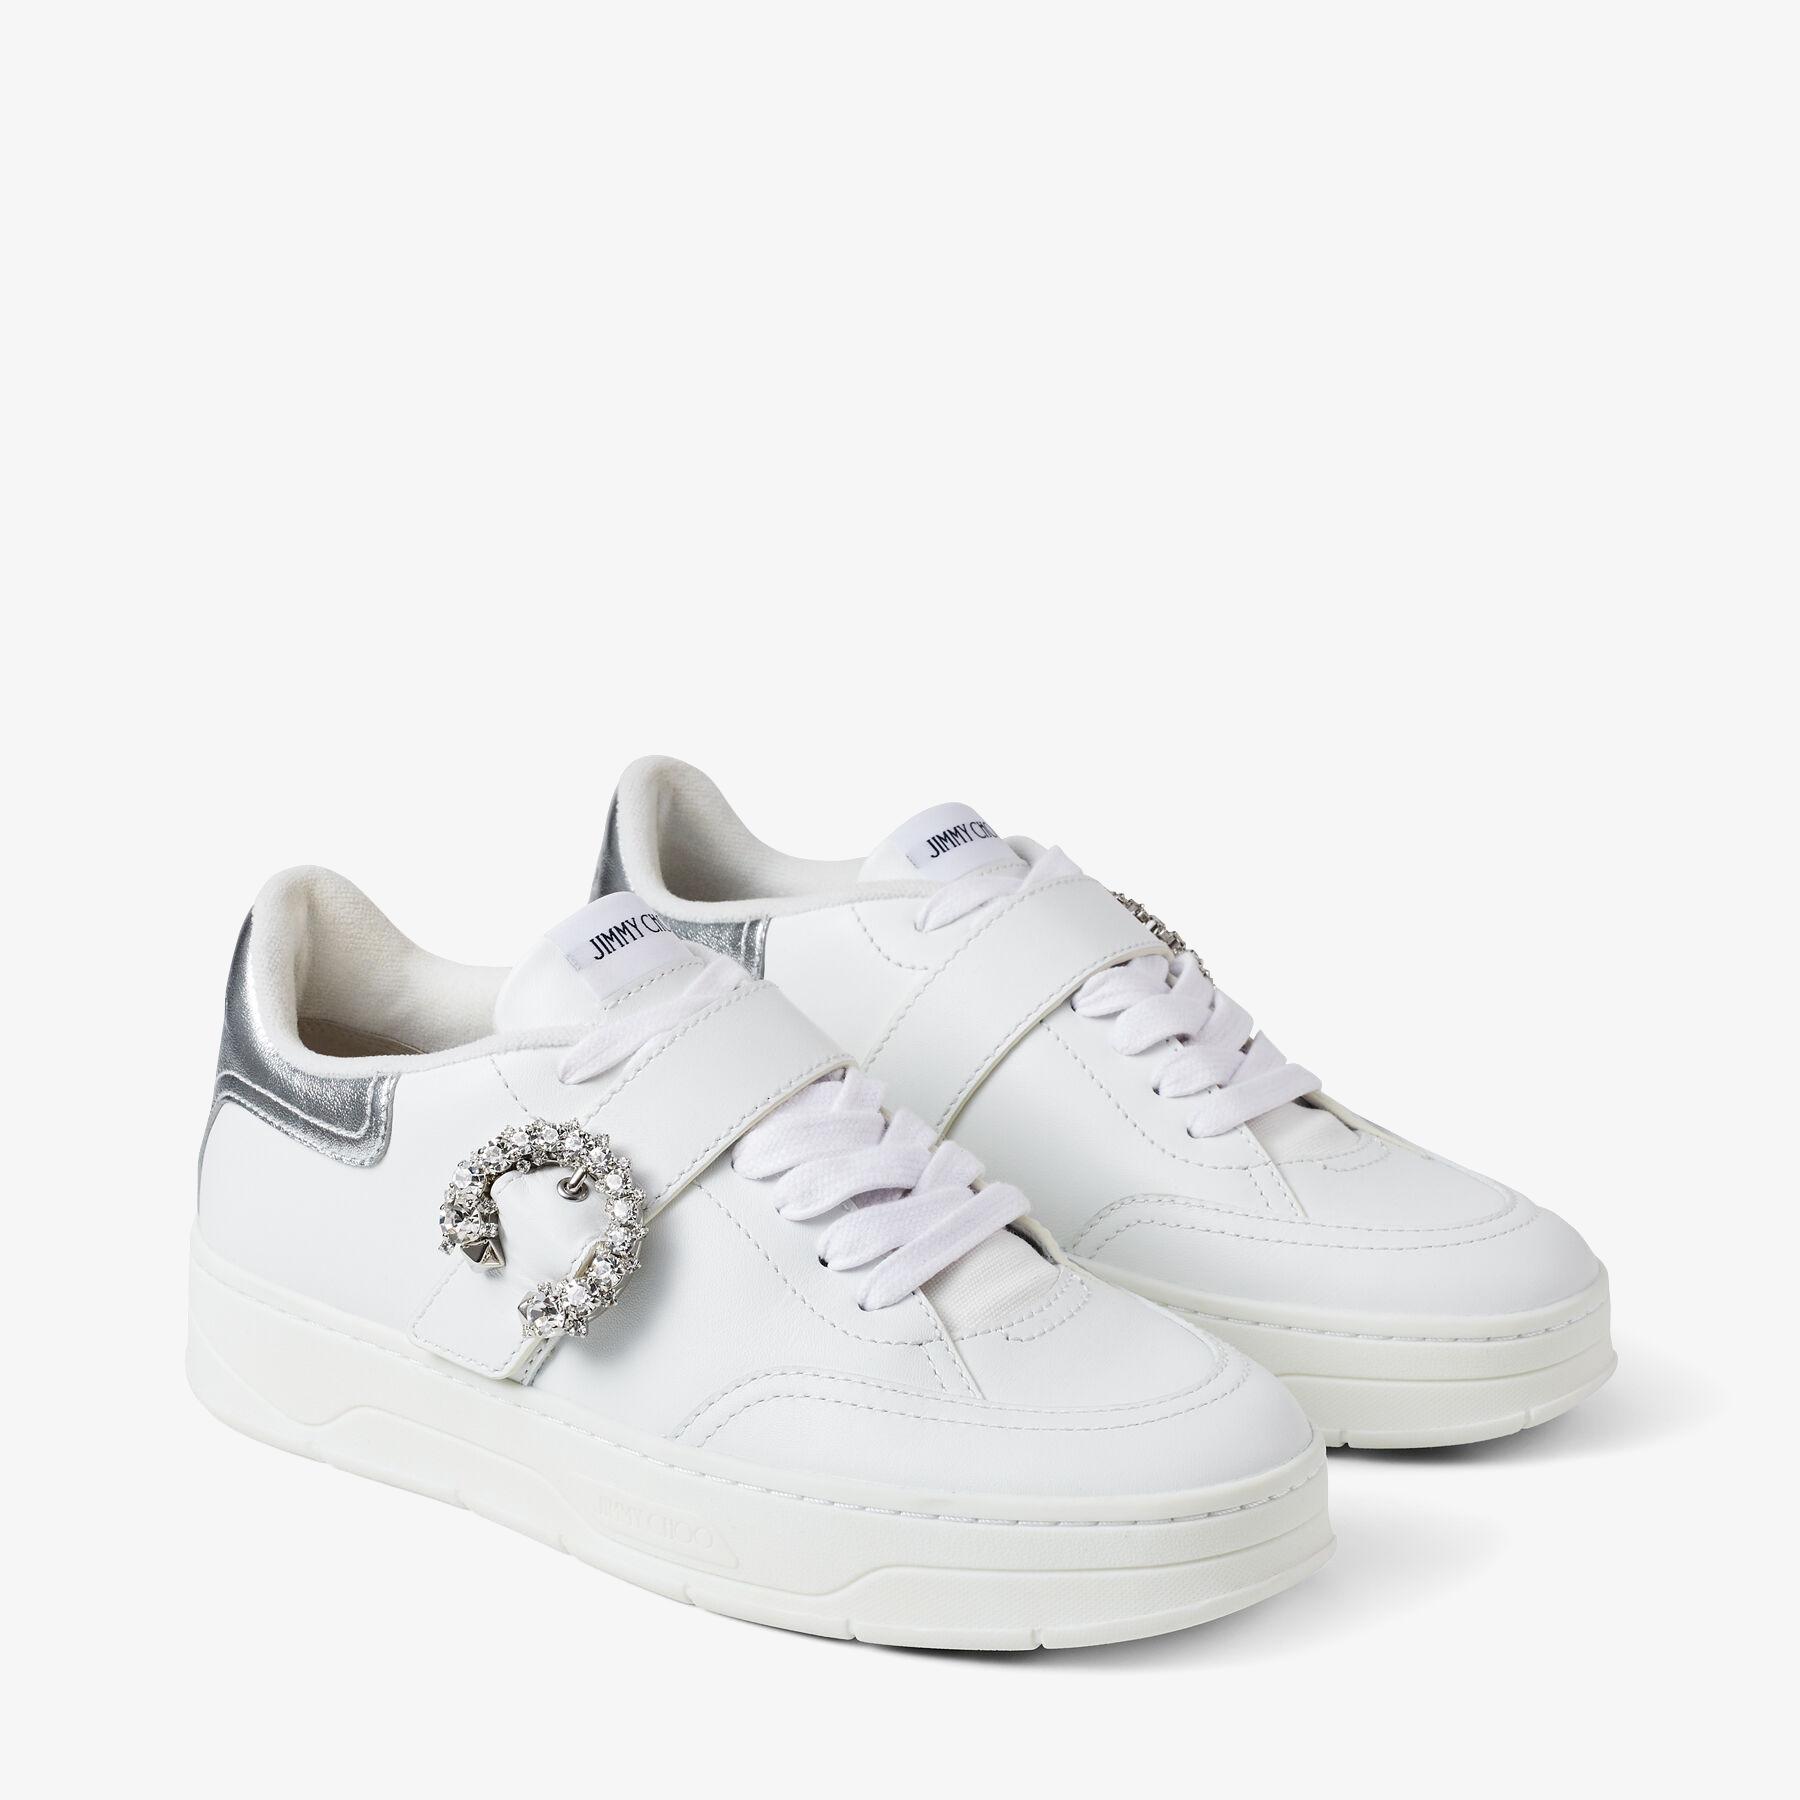 Jimmy Choo Leather Osaka Lace Up in v White/Silver/Crystal (White 